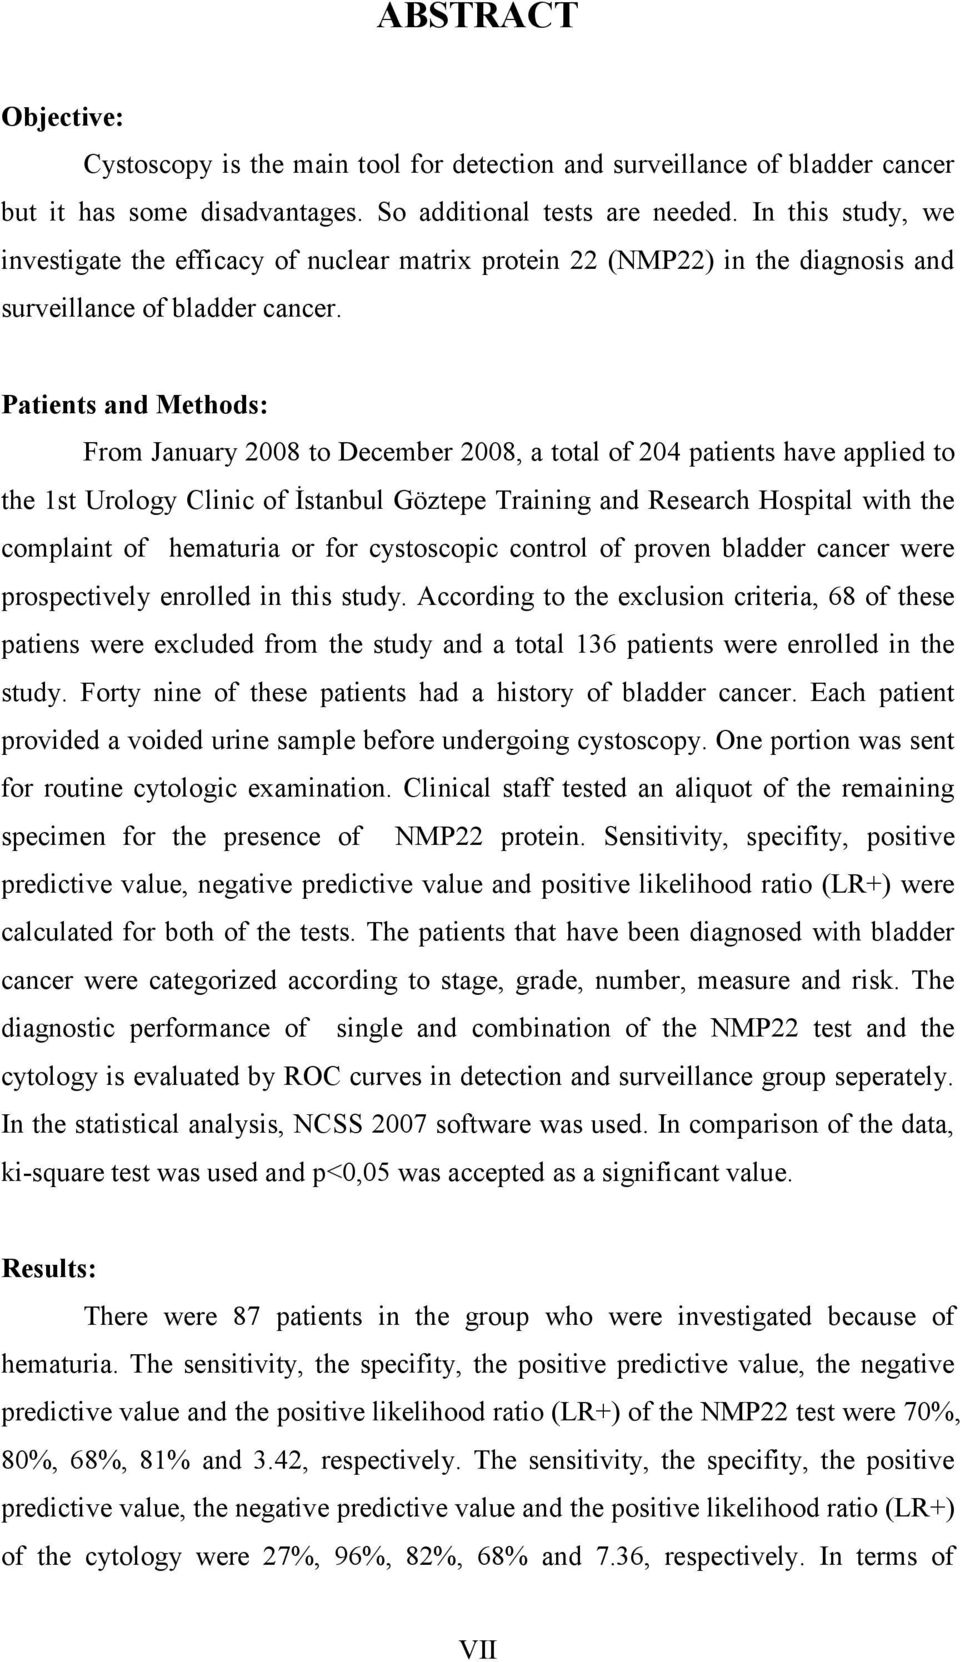 Patients and Methods: From January 2008 to December 2008, a total of 204 patients have applied to the 1st Urology Clinic of İstanbul Göztepe Training and Research Hospital with the complaint of